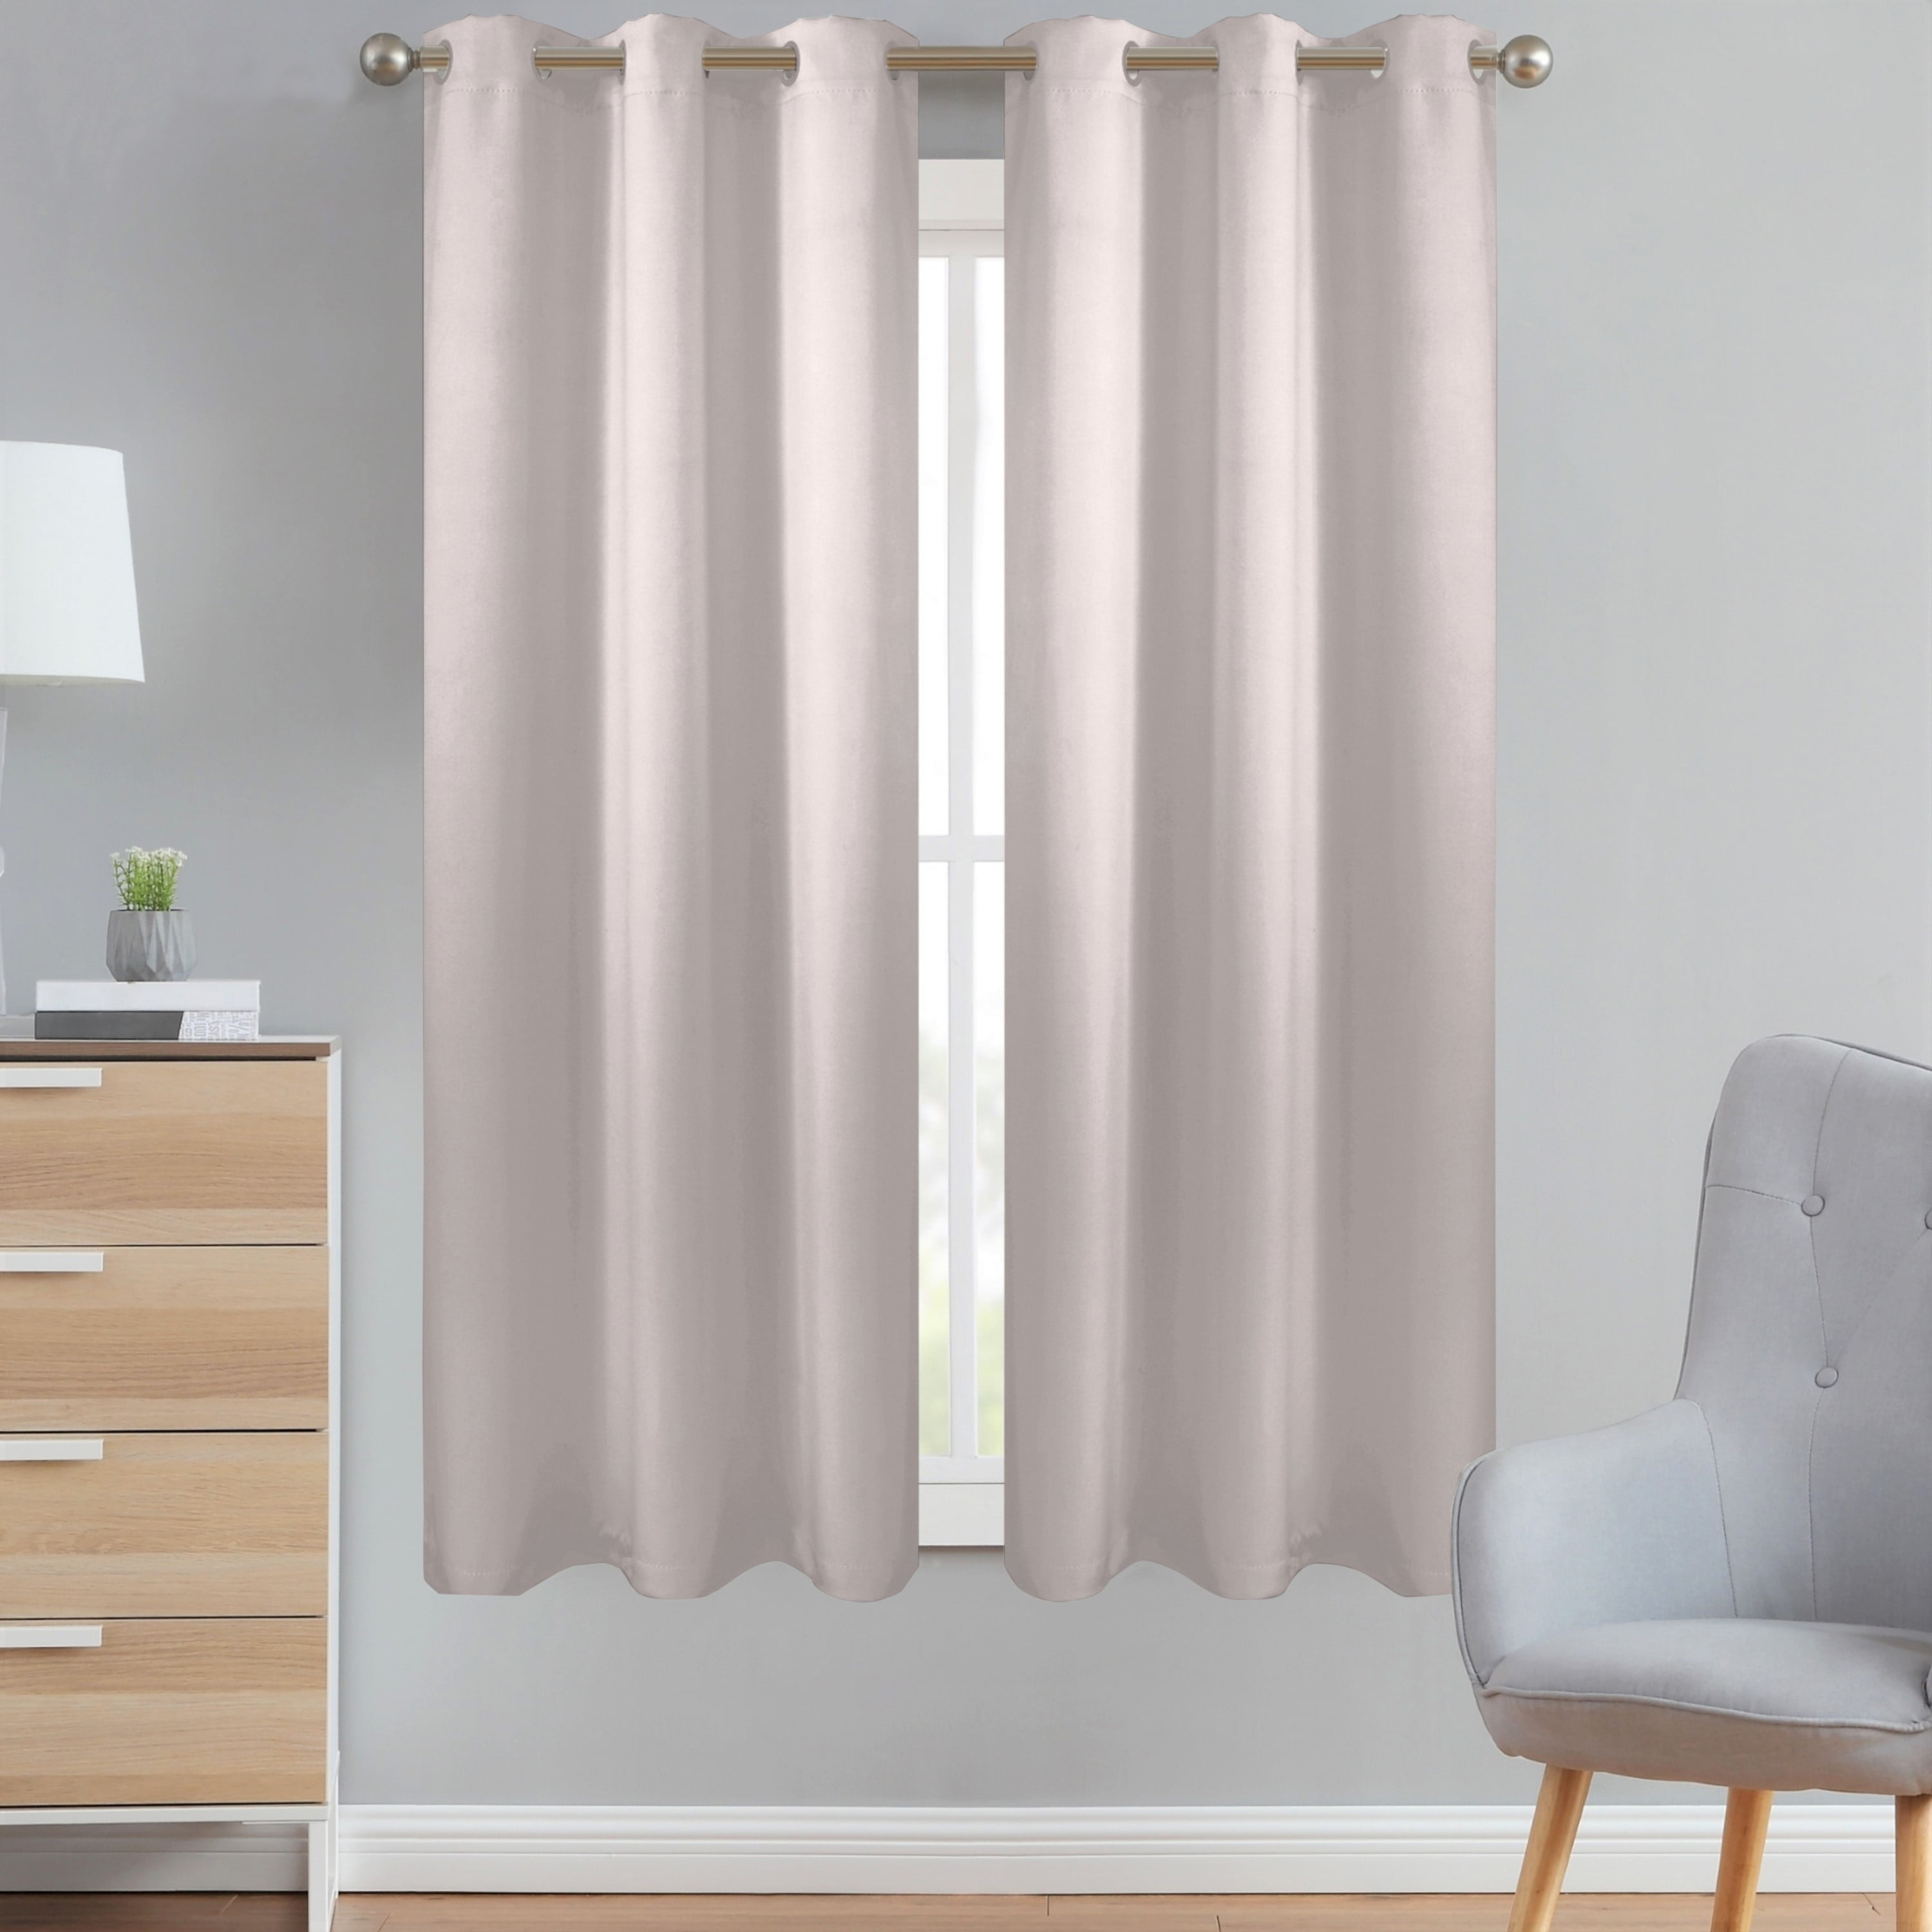 Style Basics 63 Inch Long Blackout Curtains For Bedroom 100% Total